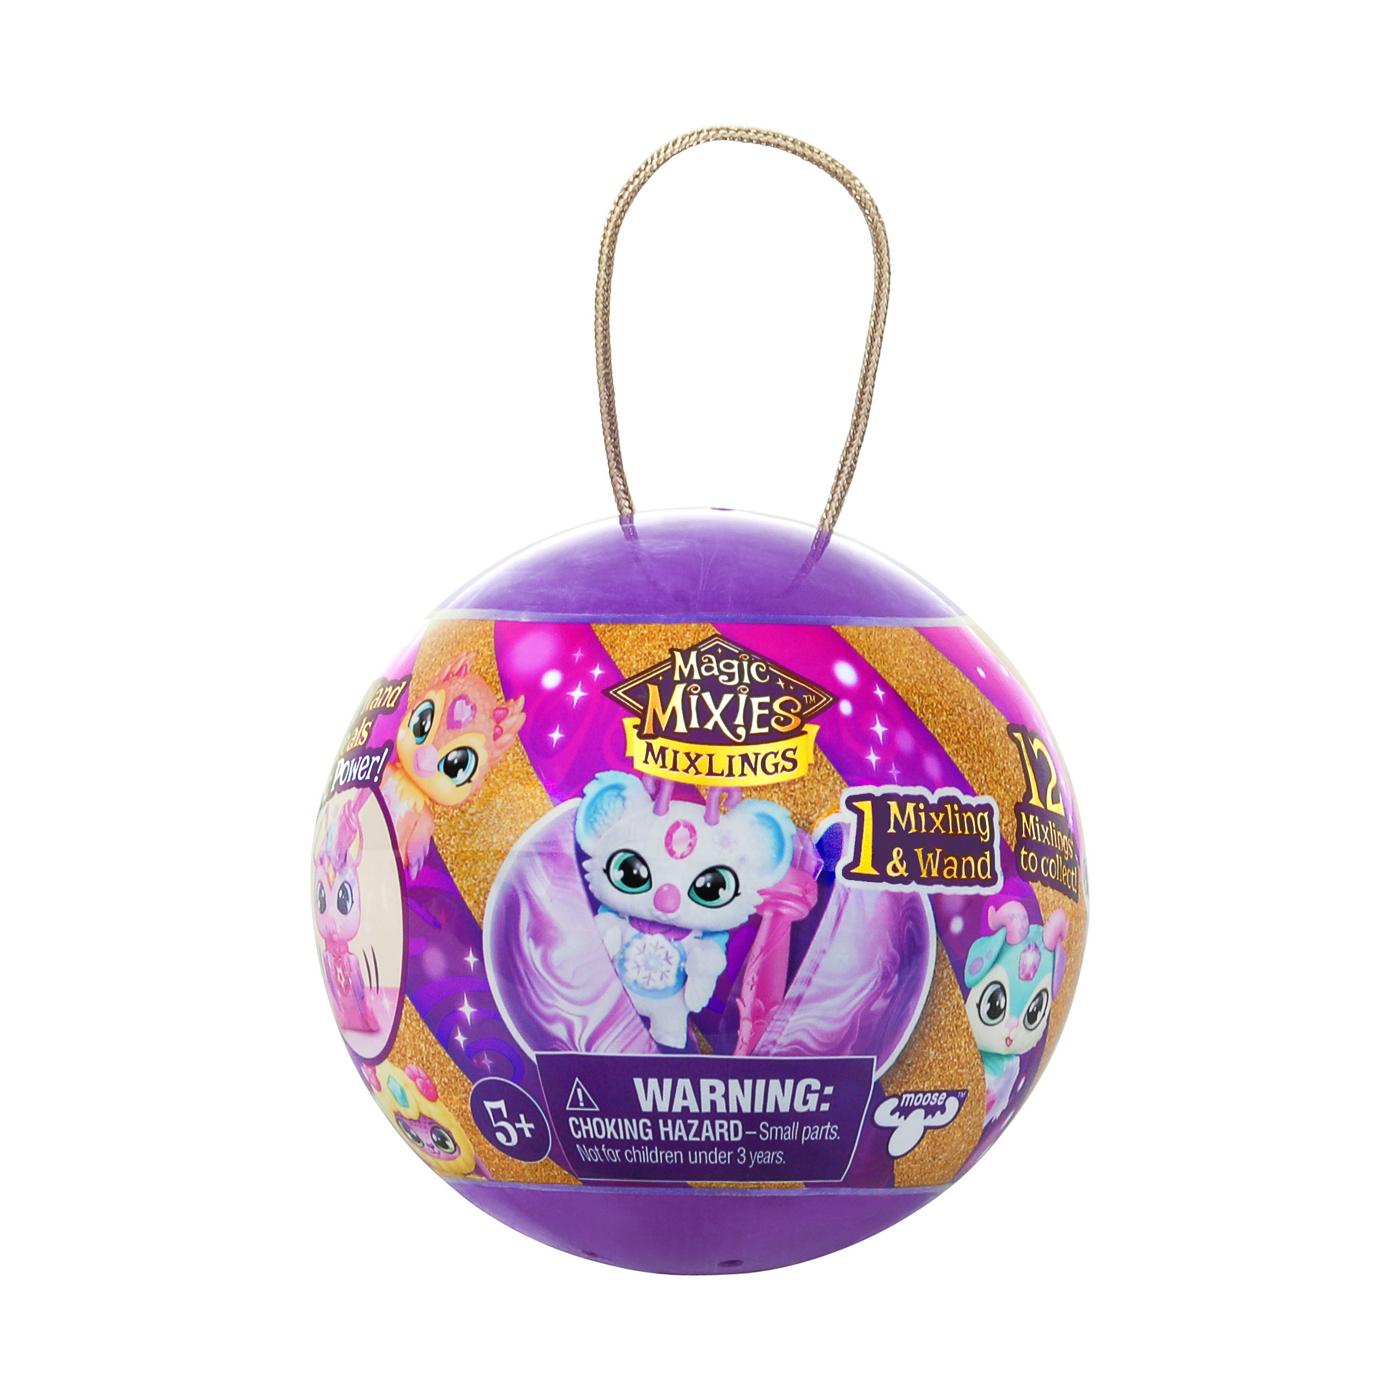 Magic Mixies Mystery Mixlings Holiday Ornament - Shop Action Figures &  Dolls at H-E-B